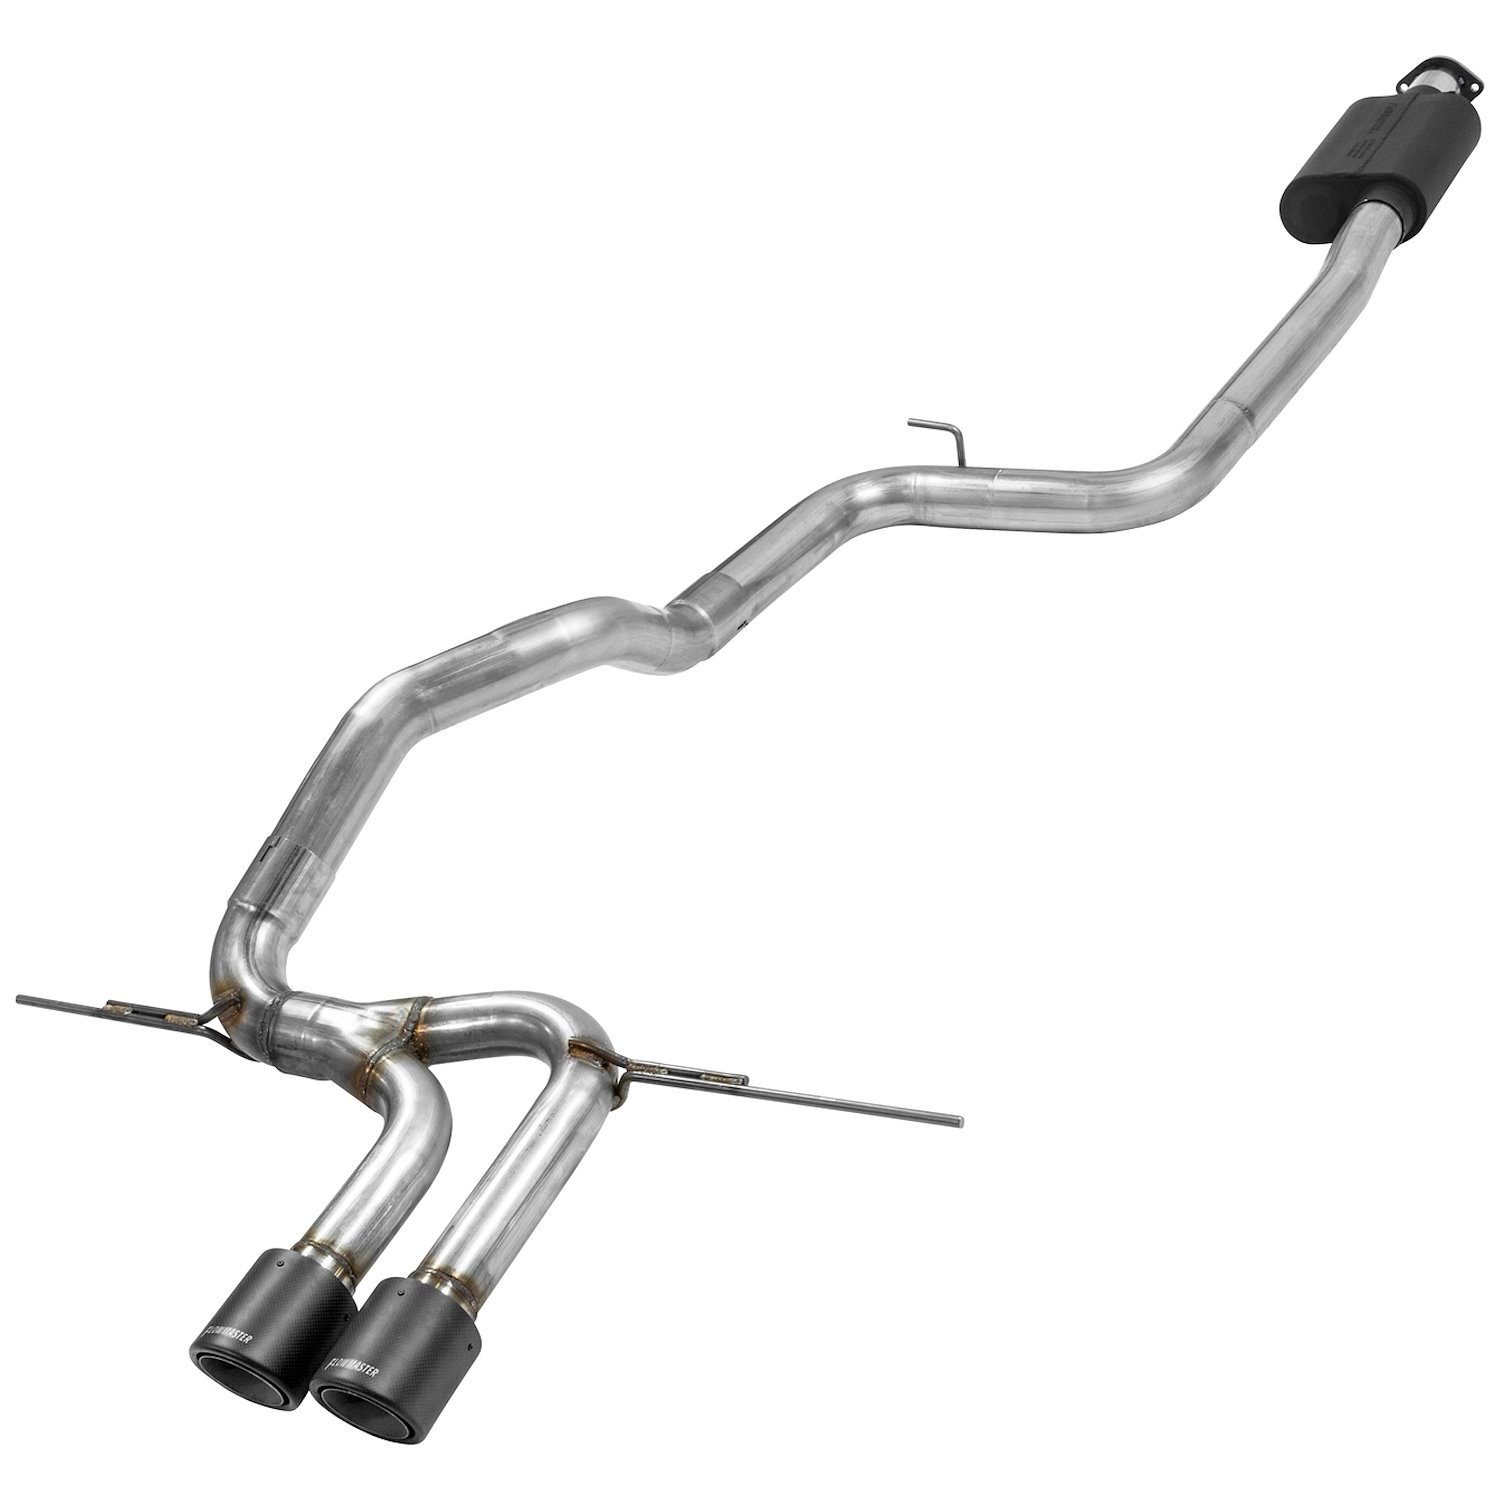 Ford Focus ST Turbocharged 2.0L Outlaw Series Cat-Back Exhaust System